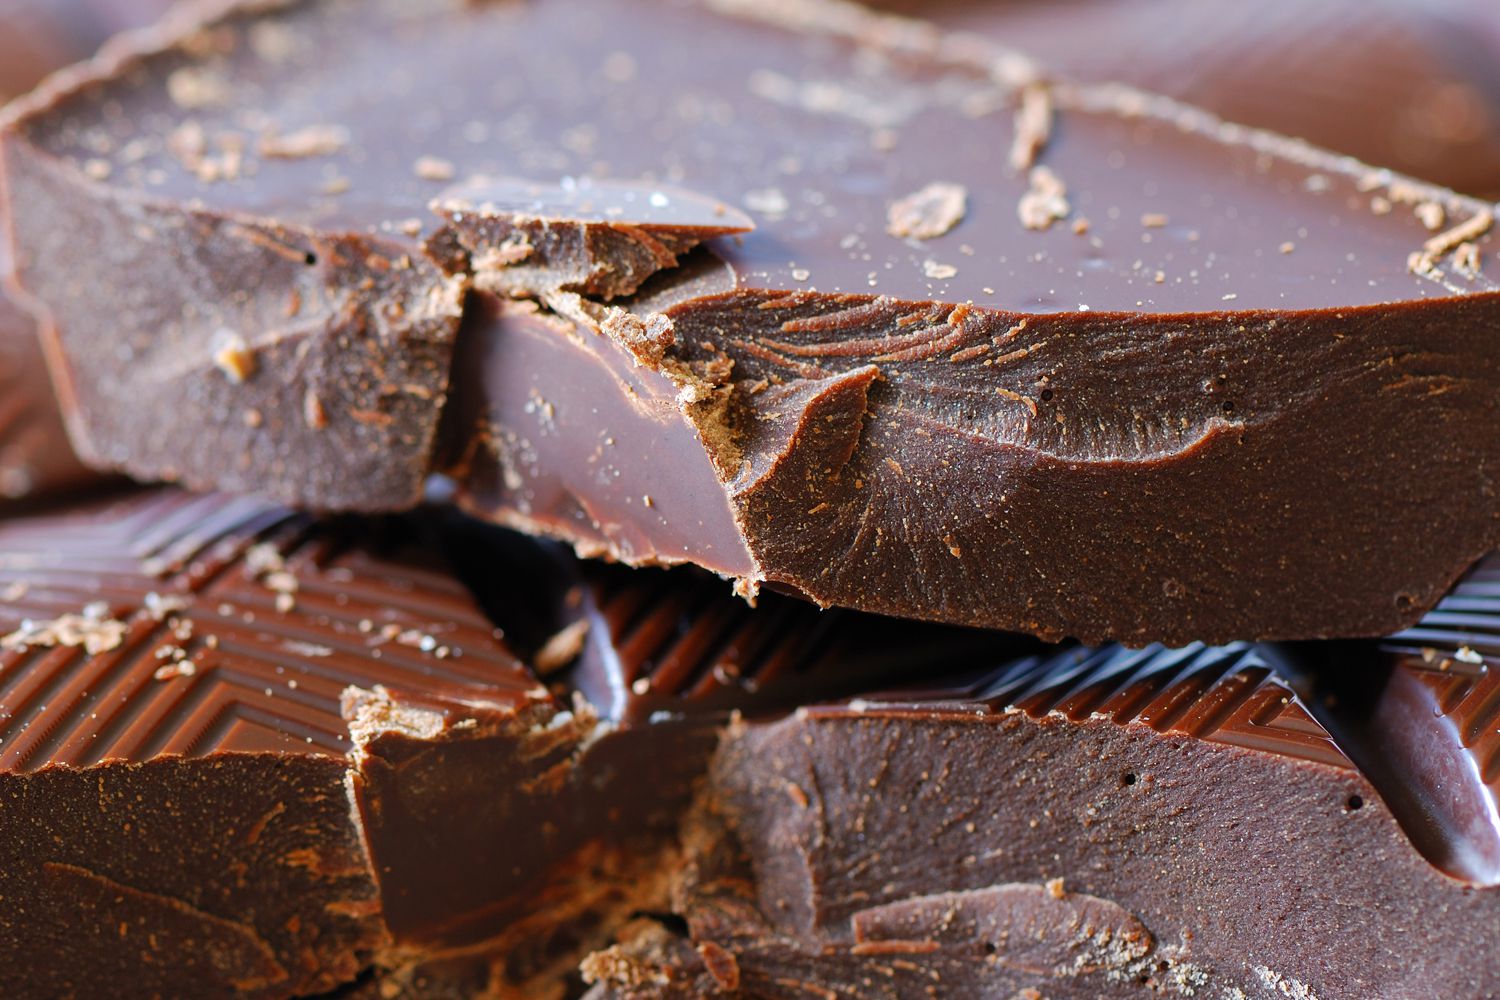 How Much Dark Chocolate Should You Eat to Live Longer?